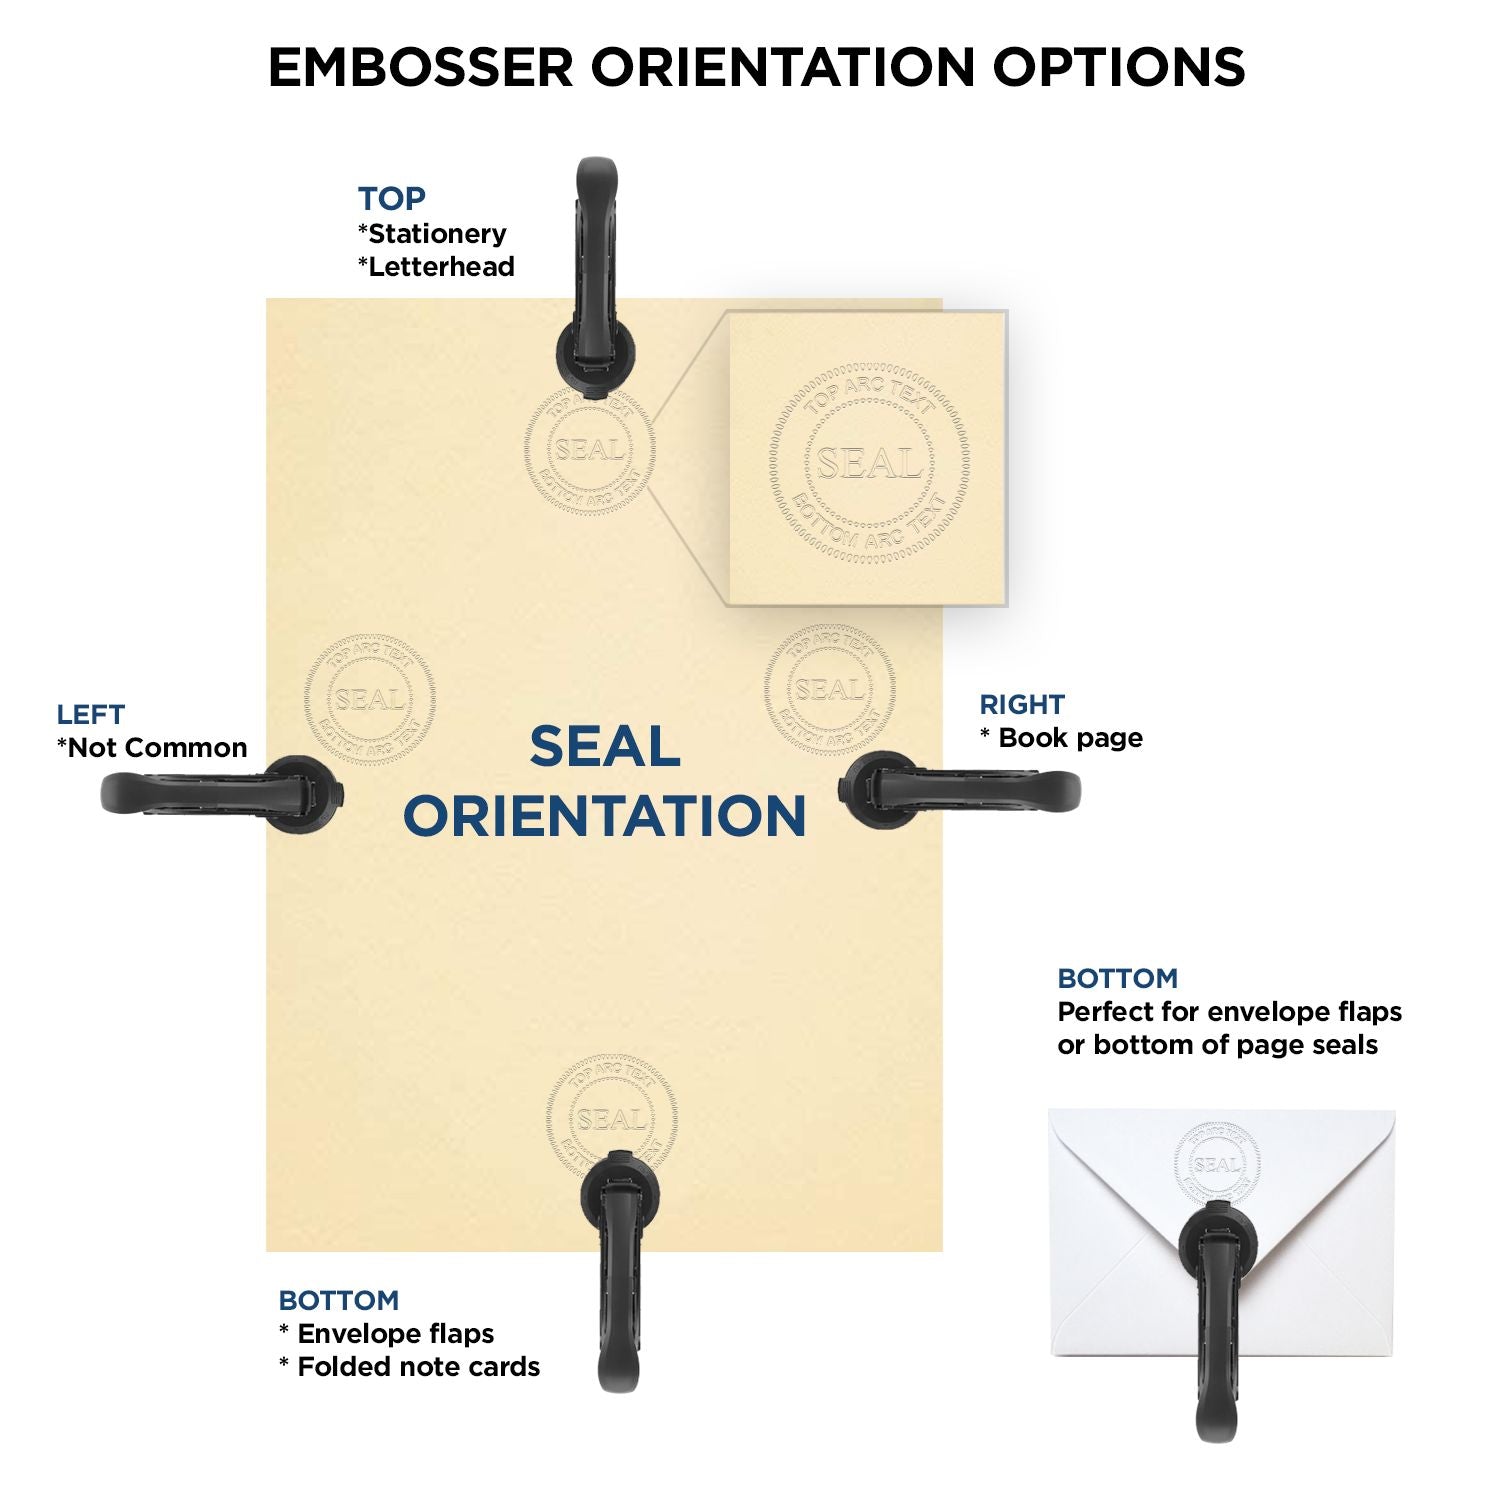 An infographic for the Heavy Duty Tennessee Landscape Architect Cast Iron Embosser showing embosser orientation, this is showing examples of a top, bottom, right and left insert.